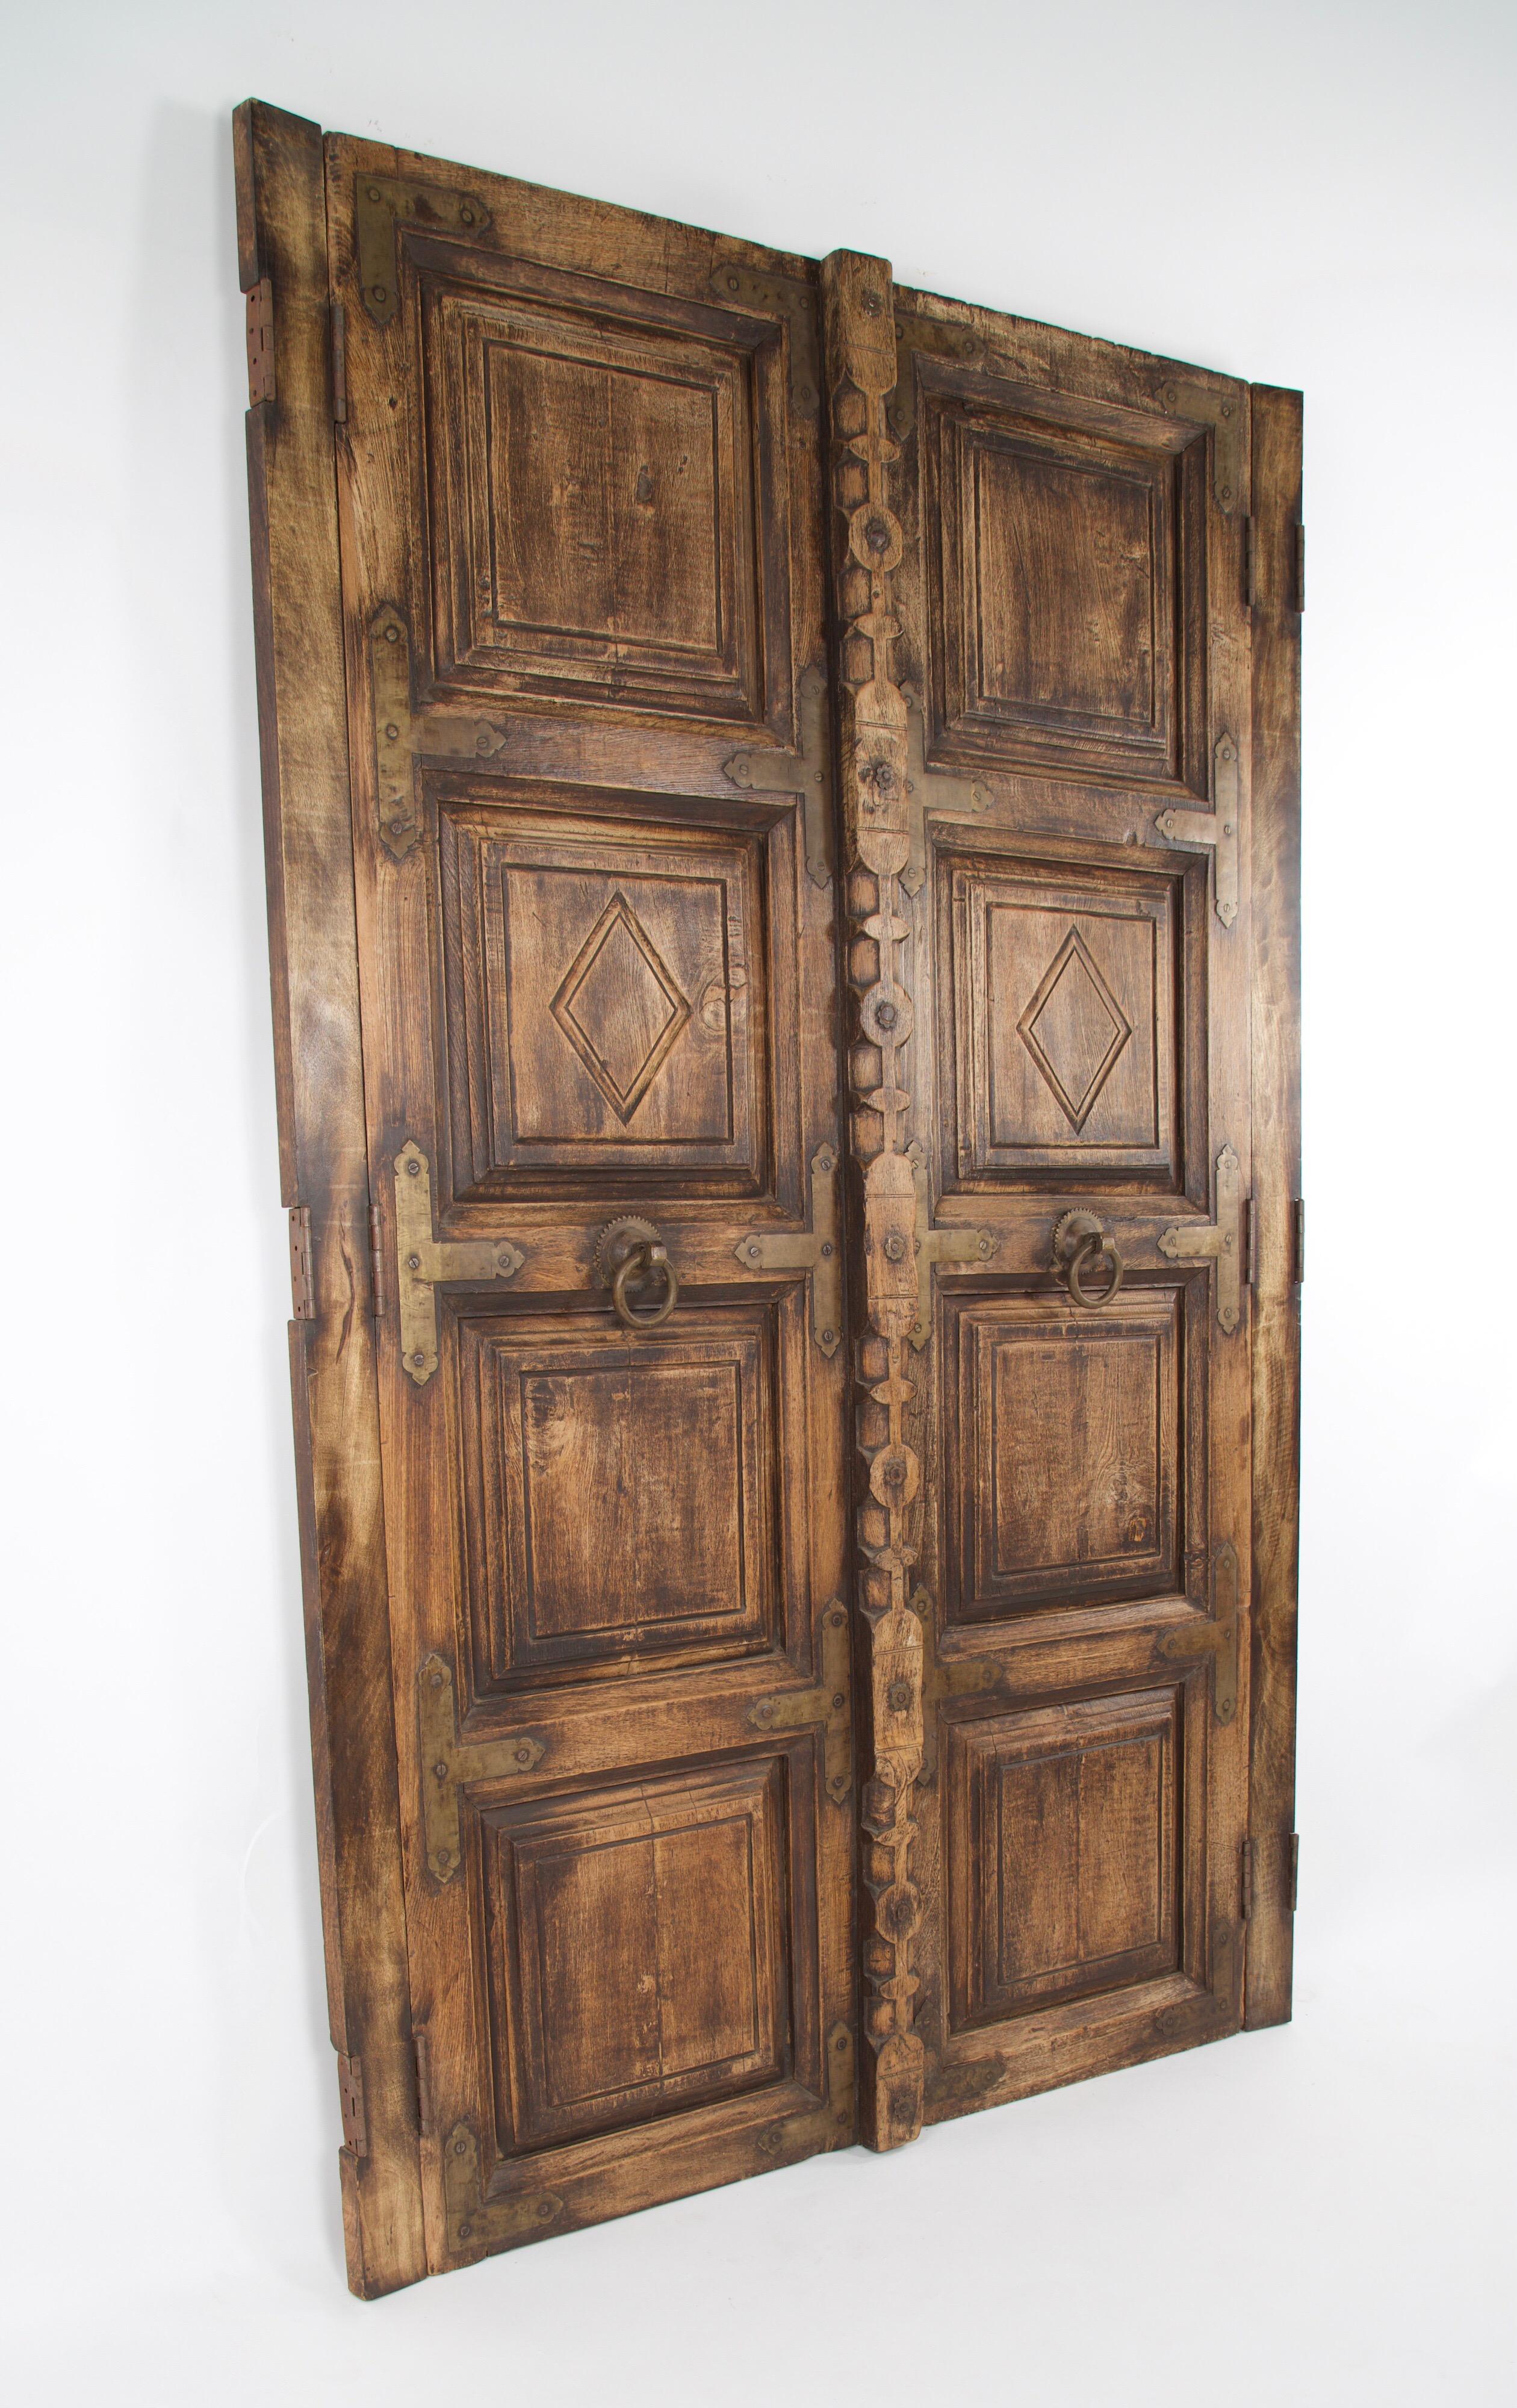 A pair of Spanish Colonial mesquite wood doors with brass door knockers also used as pulls to open the doors, brass straps and brass clavos. Four recessed panels on each door with a diamond pattern carved into one panel on each door. An elaborate